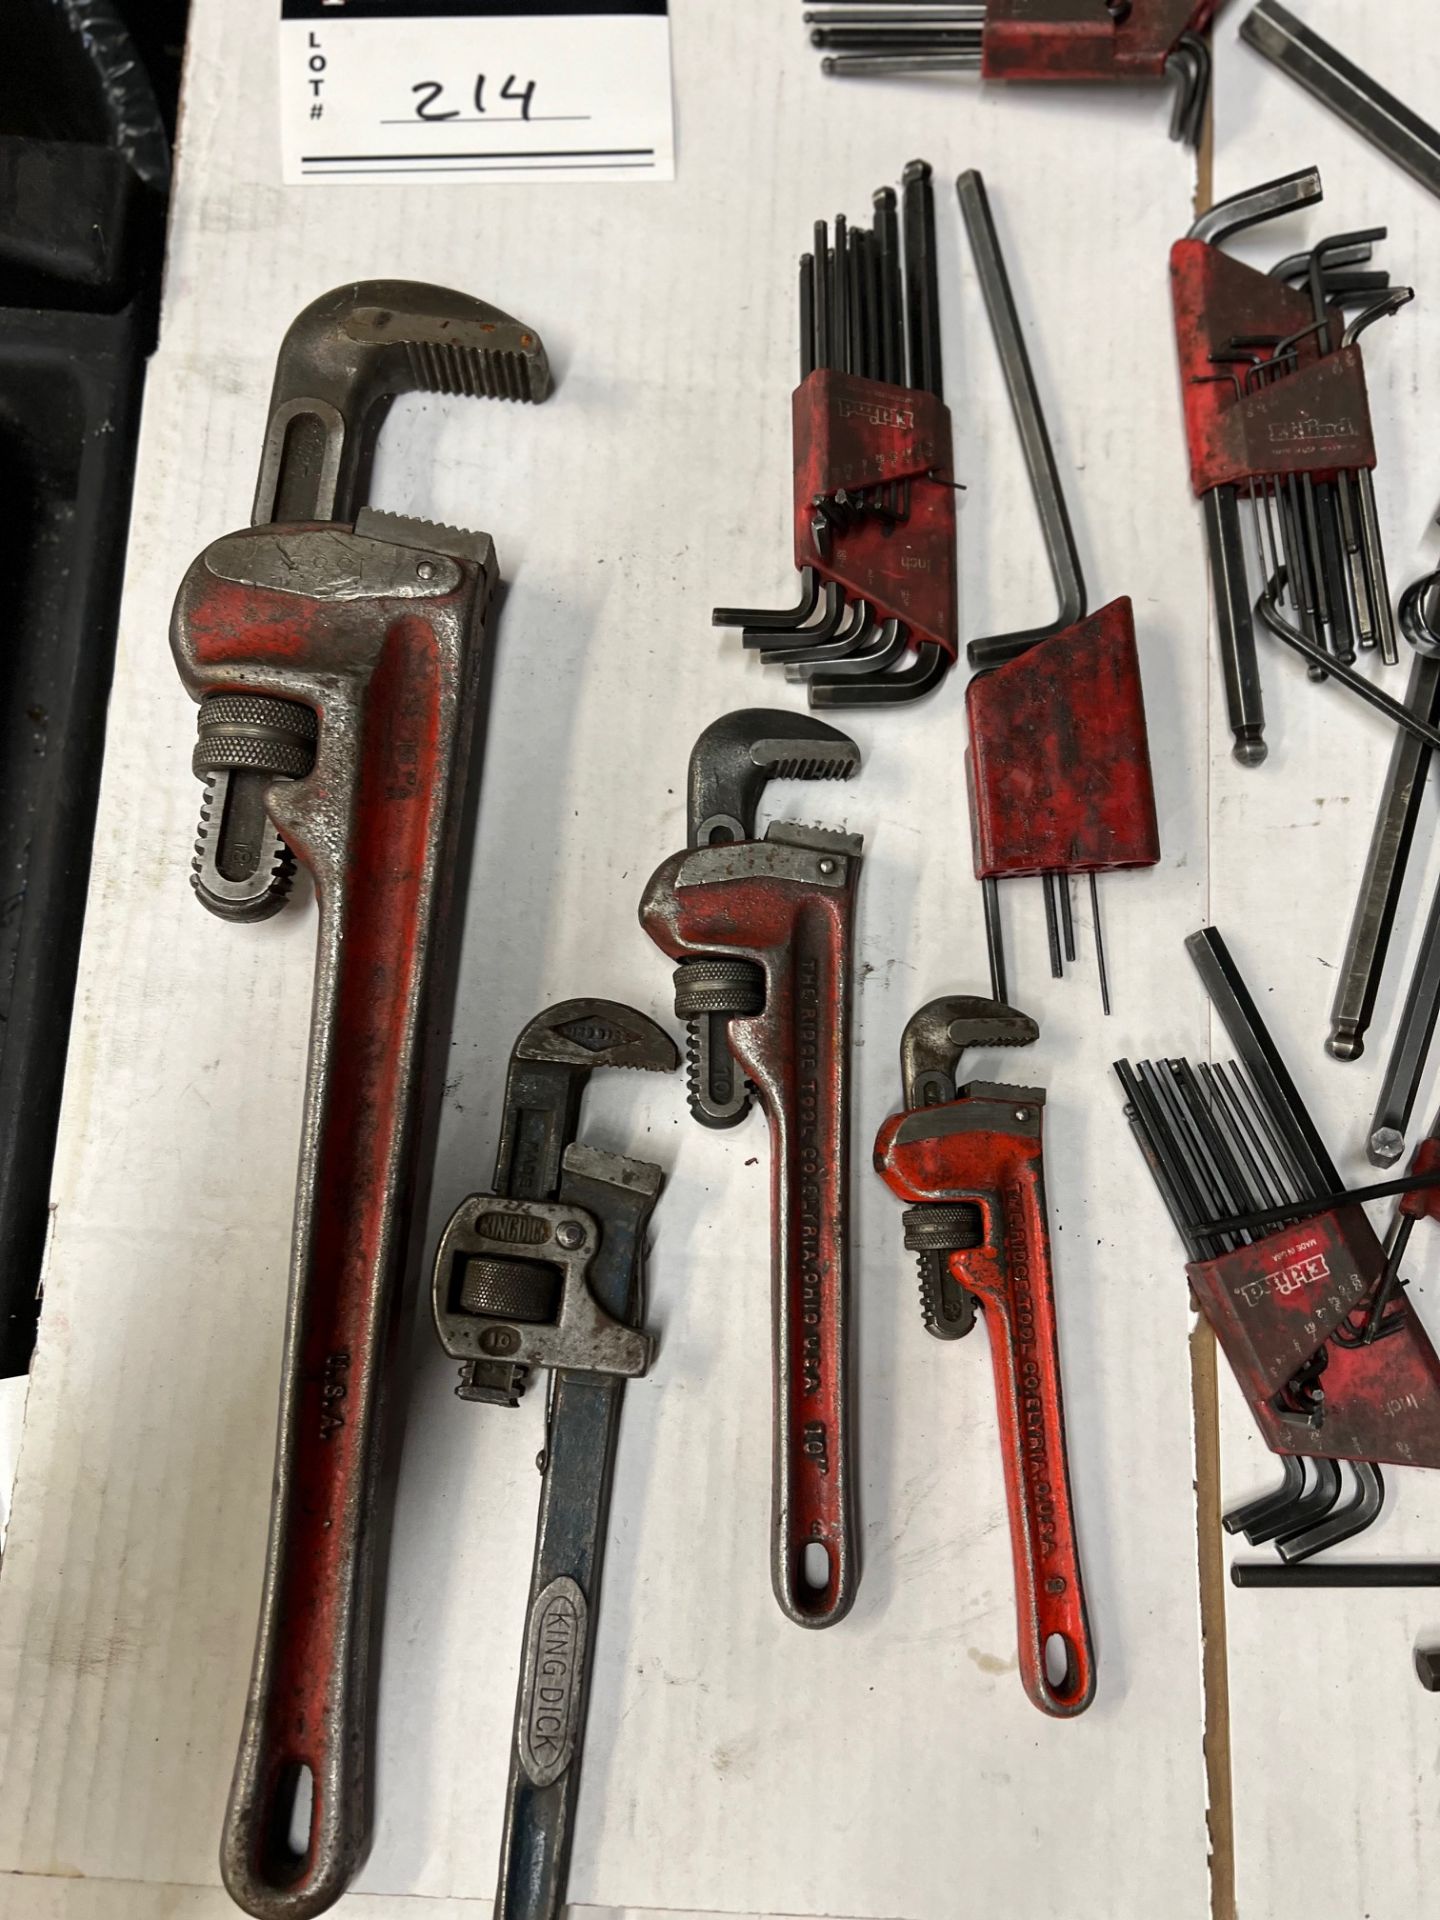 LOT/PIPE WRENCHES AND ALLEN KEYS - Image 2 of 3